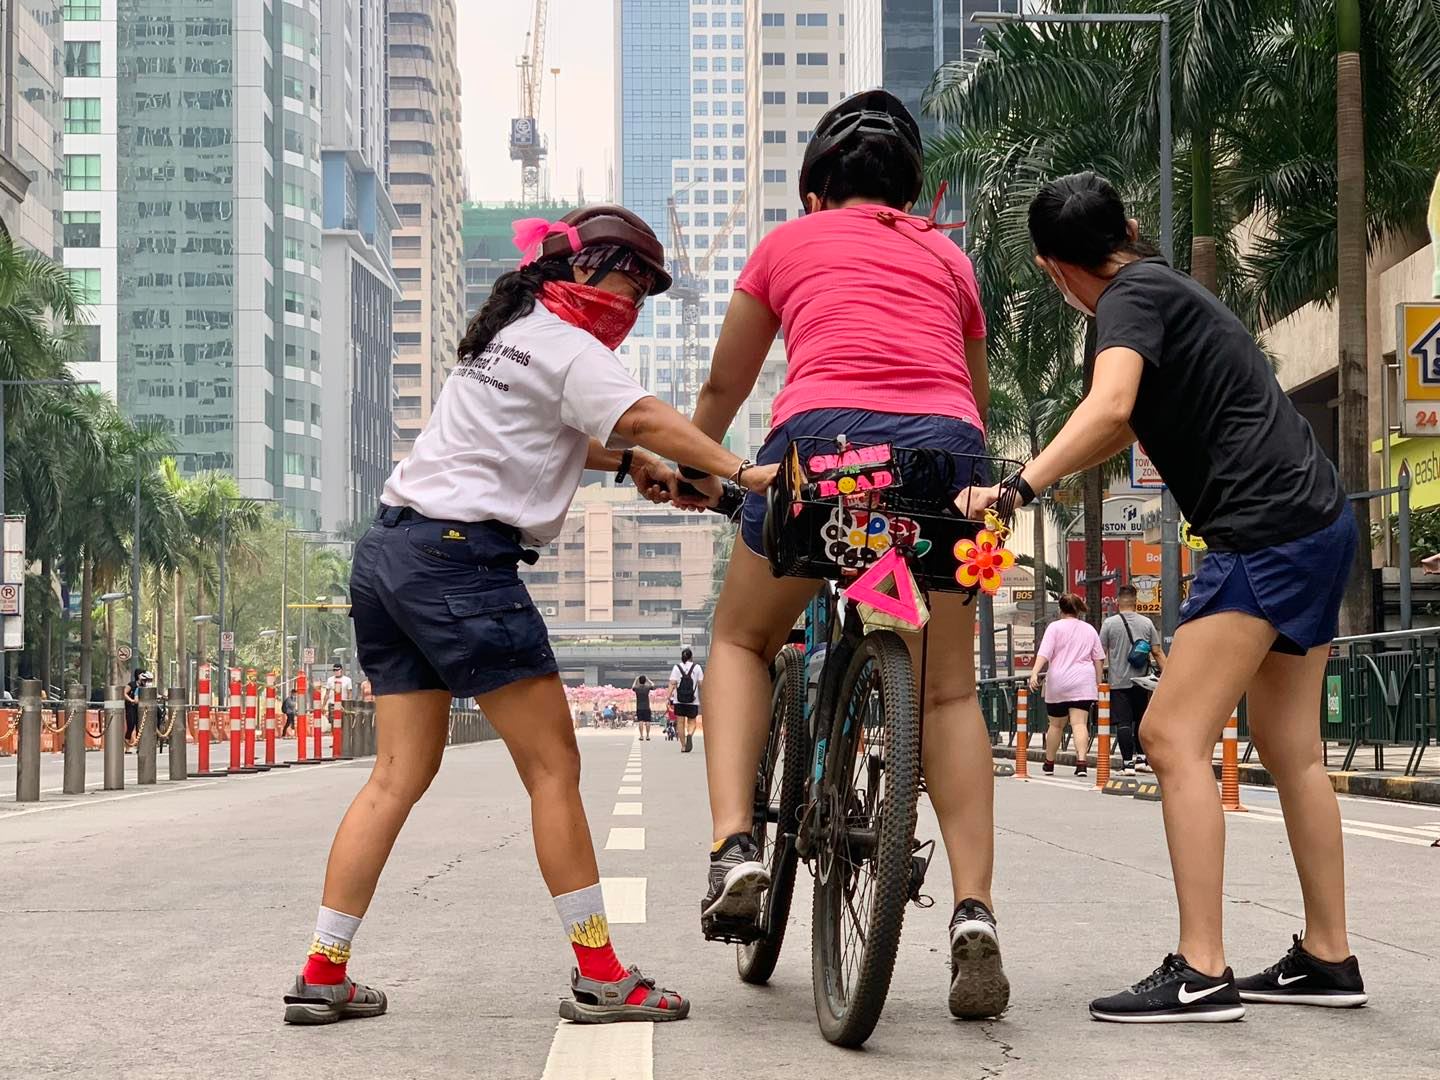 Free Bike Lessons Are Back In Pasig On Independence Day, June 12, 2022